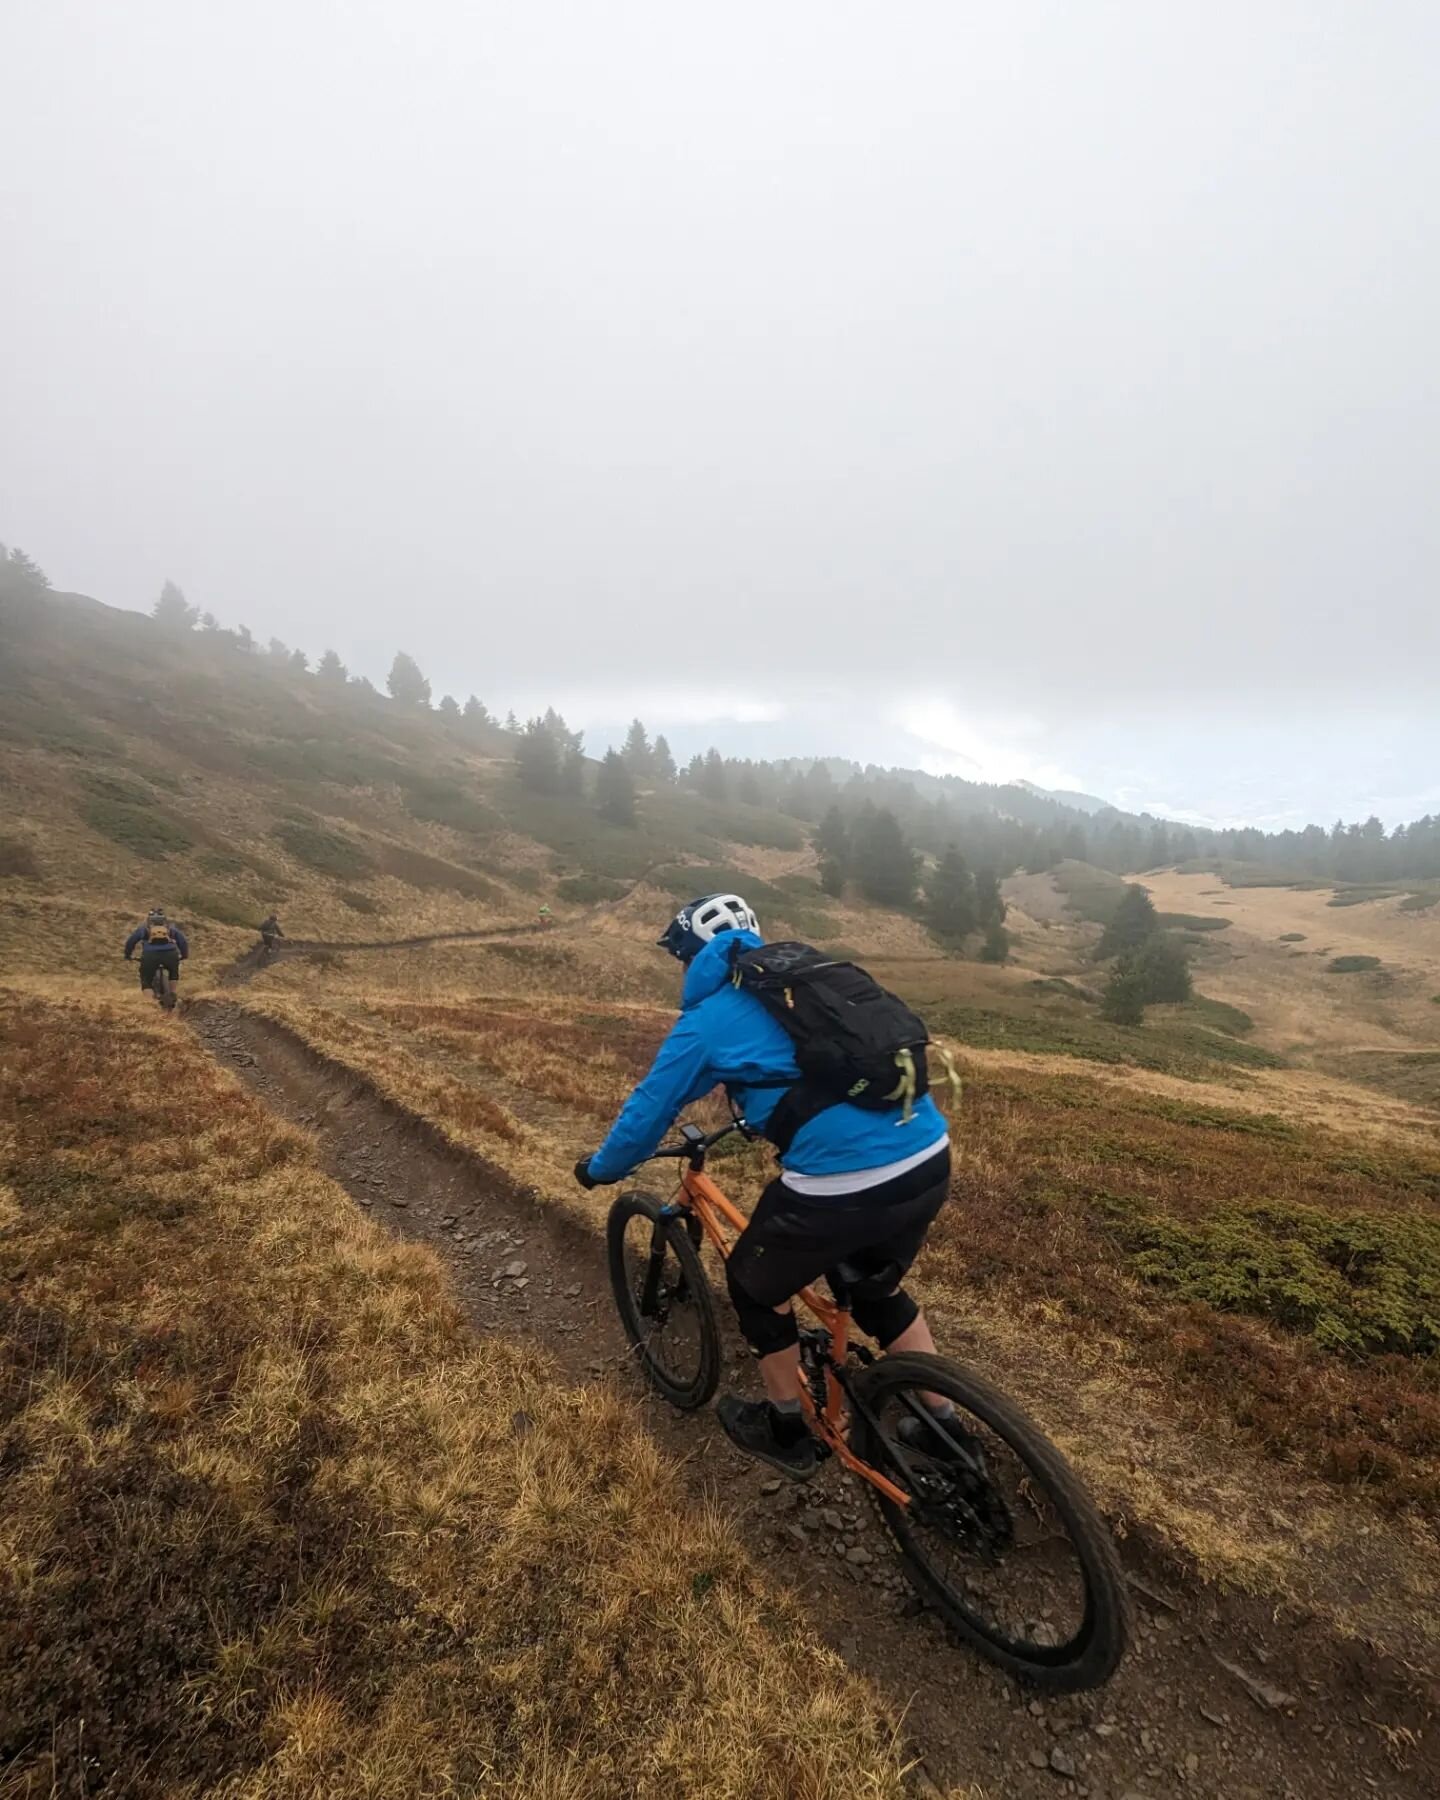 Change in the weather this morning, but it made for some atmospheric conditions up high! Trails will be primo after a much needed bit of moisture too!

#endlesstrailsmtb #queyrastraildelights #queyrasmtb #adventuresbybike